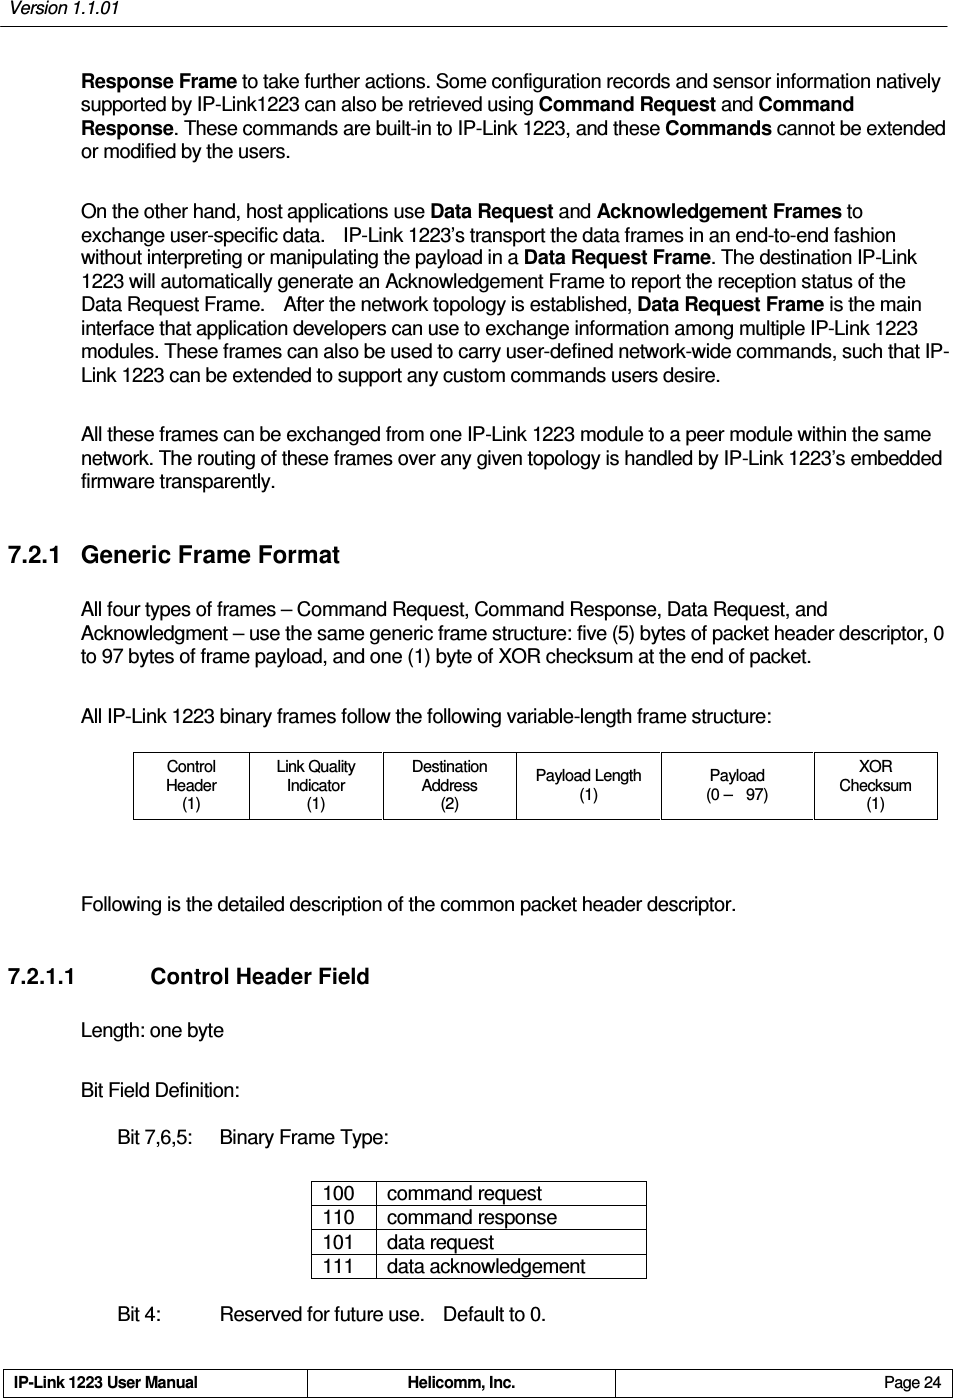 Version 1.1.01     IP-Link 1223 User Manual  Helicomm, Inc.  Page 24   Response Frame to take further actions. Some configuration records and sensor information natively supported by IP-Link1223 can also be retrieved using Command Request and Command Response. These commands are built-in to IP-Link 1223, and these Commands cannot be extended or modified by the users. On the other hand, host applications use Data Request and Acknowledgement Frames to exchange user-specific data.    IP-Link 1223’s transport the data frames in an end-to-end fashion without interpreting or manipulating the payload in a Data Request Frame. The destination IP-Link 1223 will automatically generate an Acknowledgement Frame to report the reception status of the Data Request Frame.    After the network topology is established, Data Request Frame is the main interface that application developers can use to exchange information among multiple IP-Link 1223 modules. These frames can also be used to carry user-defined network-wide commands, such that IP-Link 1223 can be extended to support any custom commands users desire. All these frames can be exchanged from one IP-Link 1223 module to a peer module within the same network. The routing of these frames over any given topology is handled by IP-Link 1223’s embedded firmware transparently. 7.2.1  Generic Frame Format All four types of frames – Command Request, Command Response, Data Request, and Acknowledgment – use the same generic frame structure: five (5) bytes of packet header descriptor, 0 to 97 bytes of frame payload, and one (1) byte of XOR checksum at the end of packet.     All IP-Link 1223 binary frames follow the following variable-length frame structure: Control Header (1) Link Quality   Indicator (1) Destination   Address (2) Payload Length (1) Payload (0 –    97) XOR Checksum (1)  Following is the detailed description of the common packet header descriptor. 7.2.1.1    Control Header Field Length: one byte  Bit Field Definition:   Bit 7,6,5:  Binary Frame Type:  100  command request 110  command response 101  data request 111  data acknowledgement  Bit 4:     Reserved for future use.    Default to 0. 